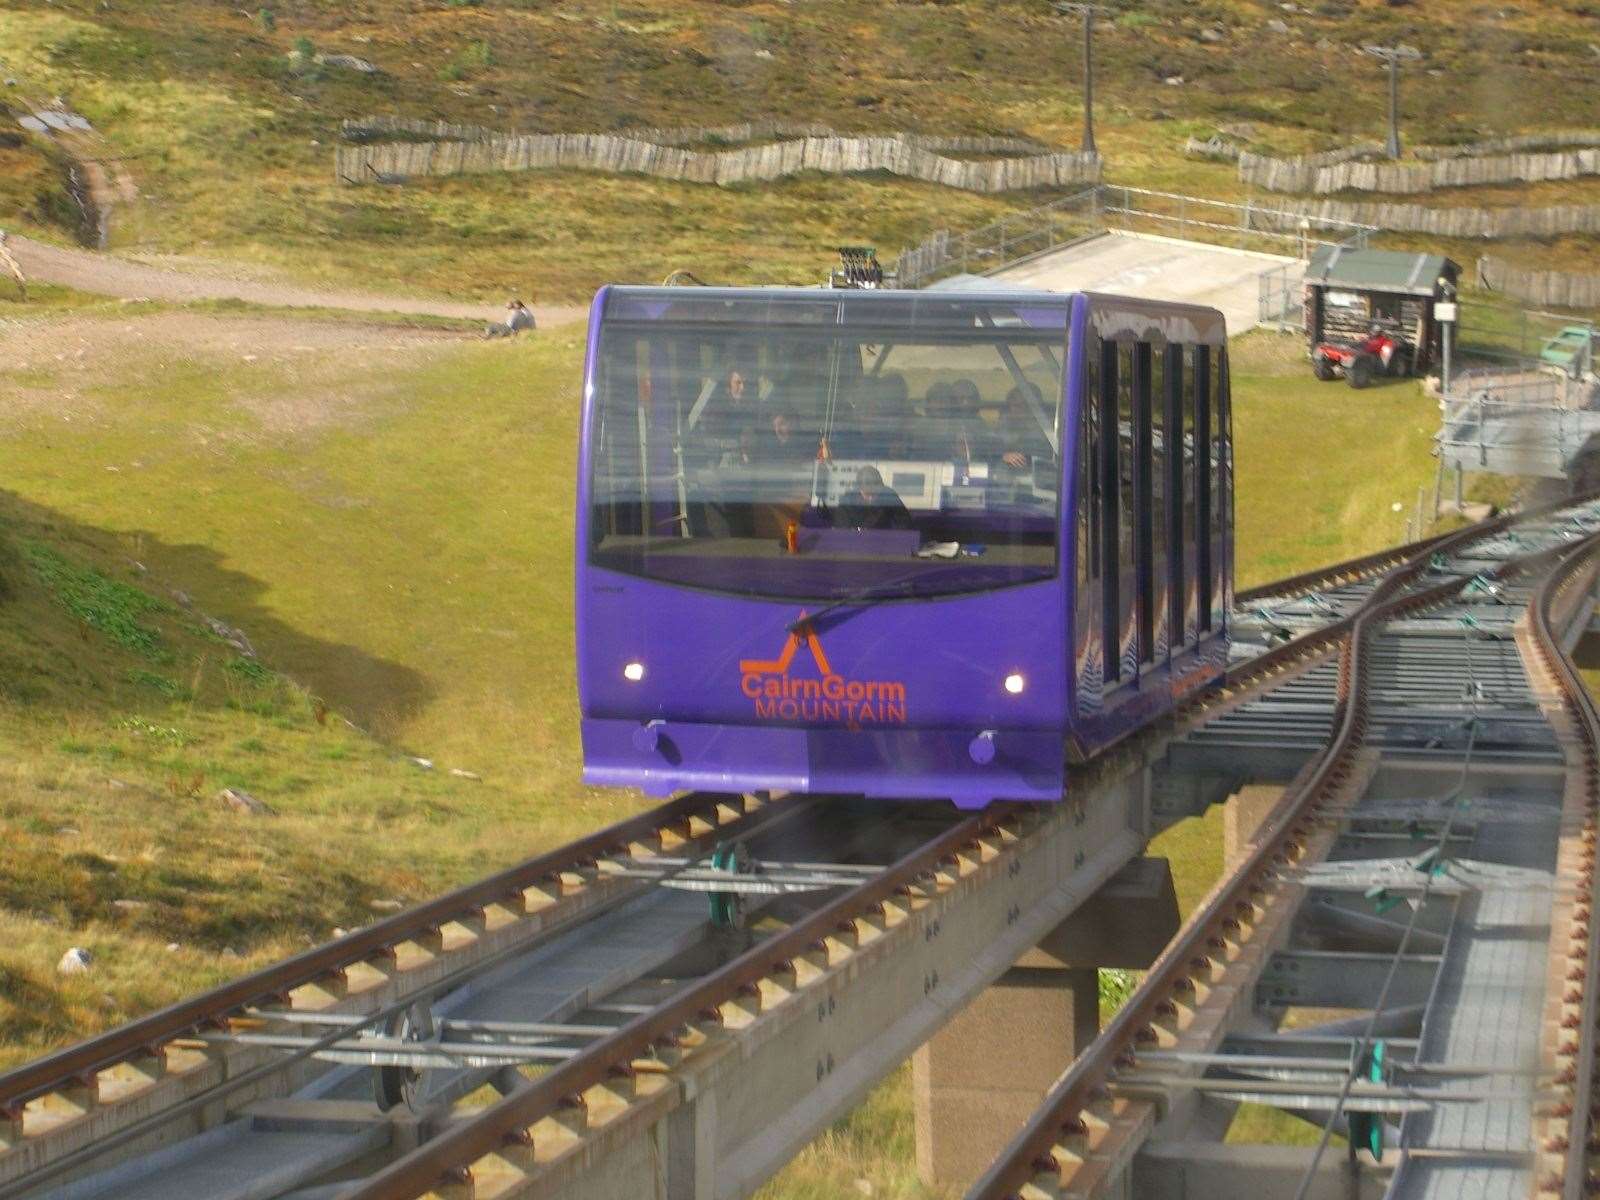 The funicular railway, which is currently out of service, on Cairngorm Mountain.